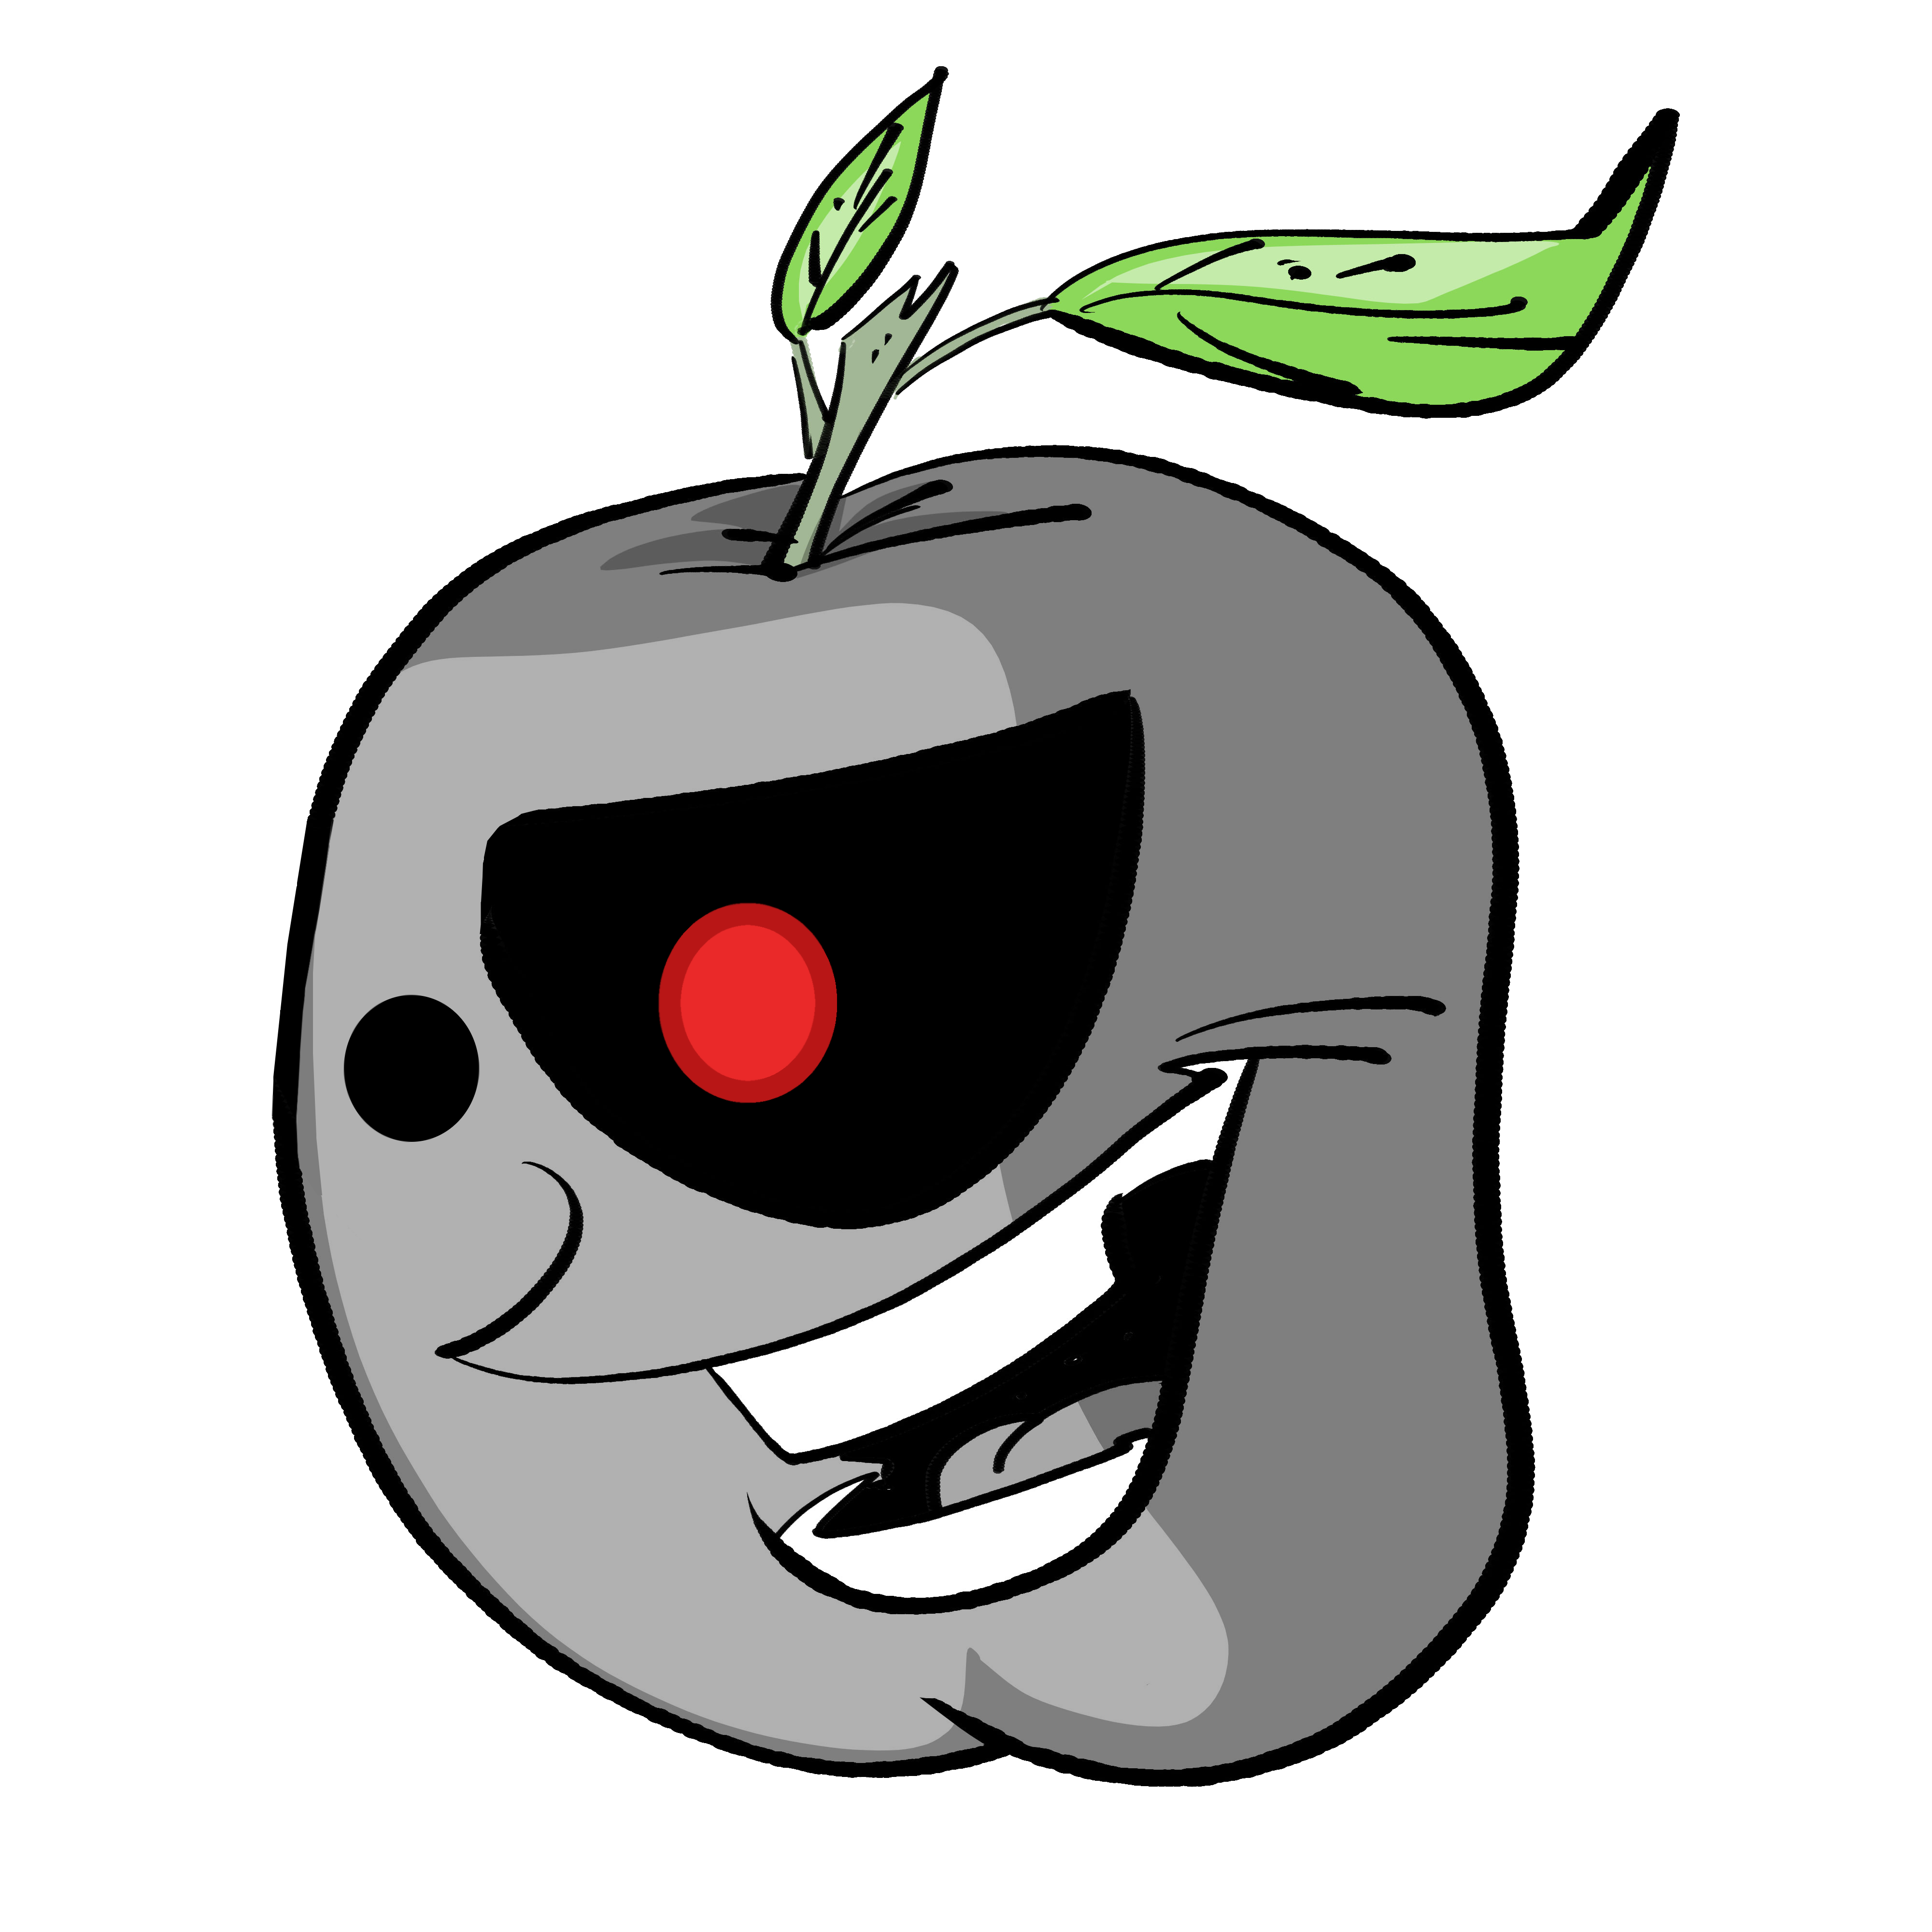 The traditional Juiced.GS smiling apple logo, except the apple is gray and has a red eye over a black eyeplate, like the Borg from Star Trek